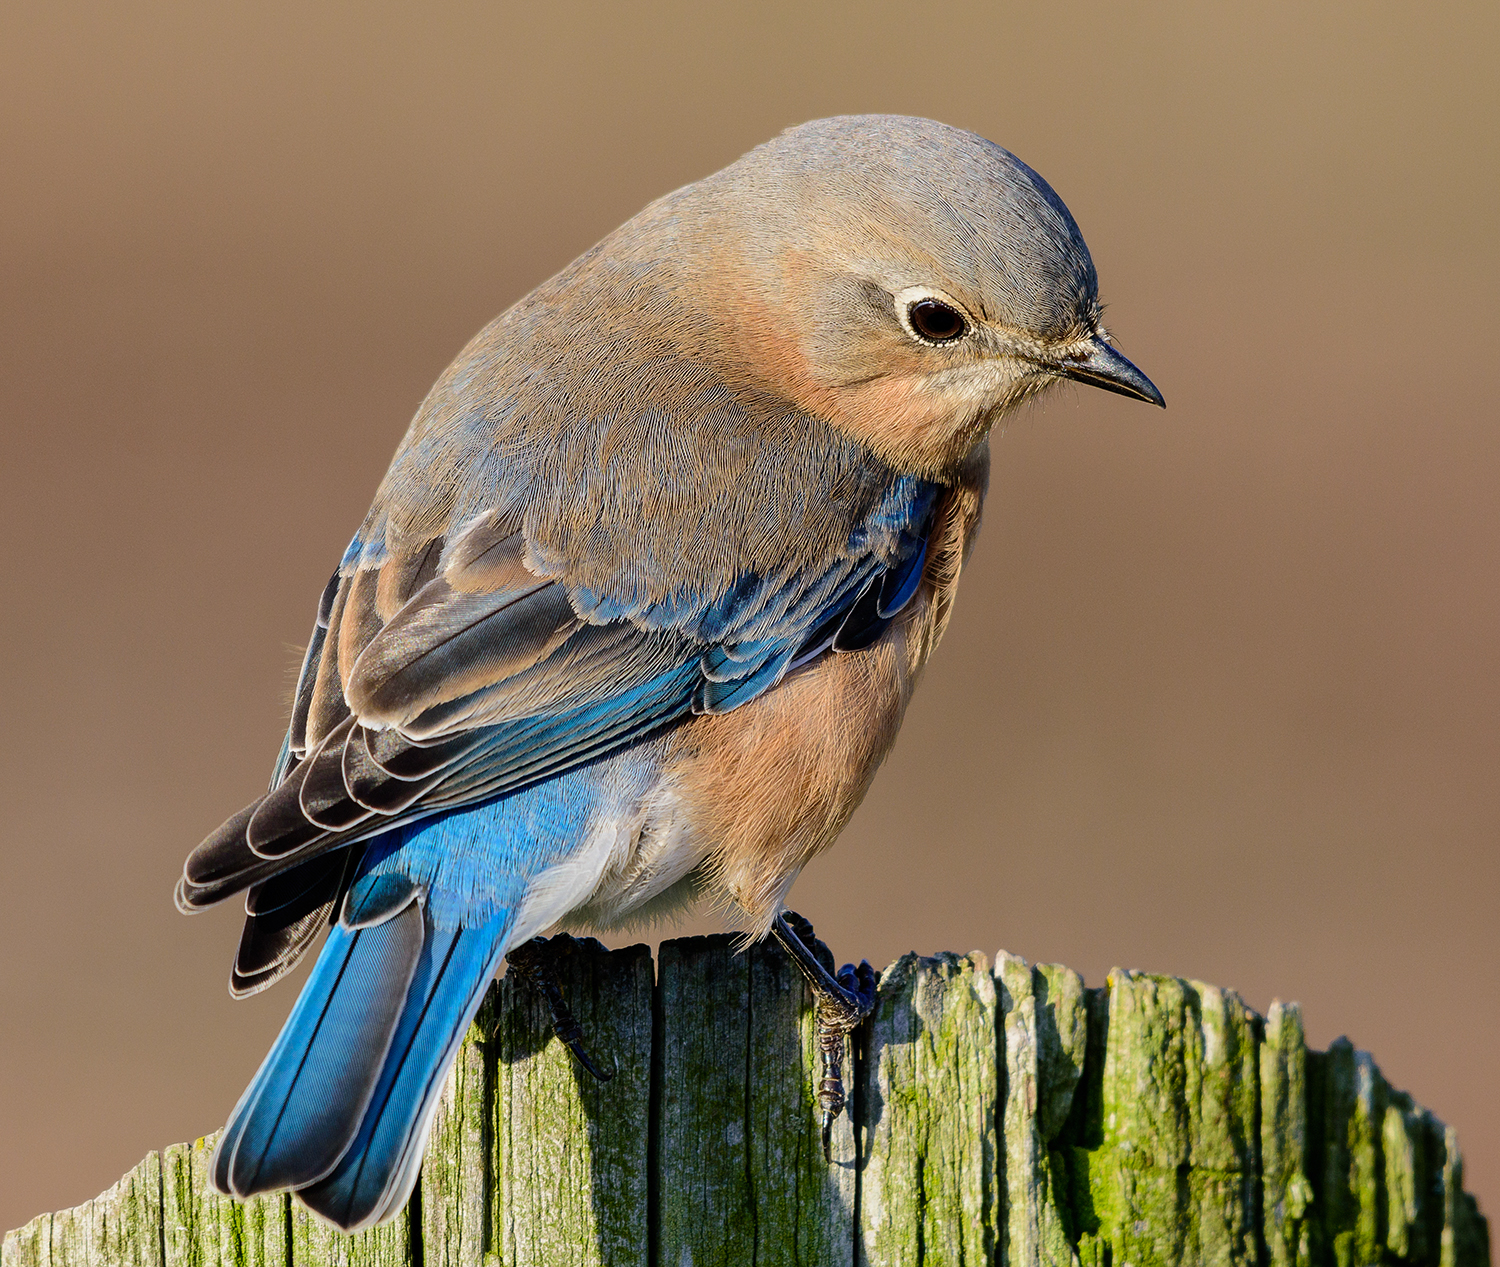 female eastern bluebird perched on a wooden post